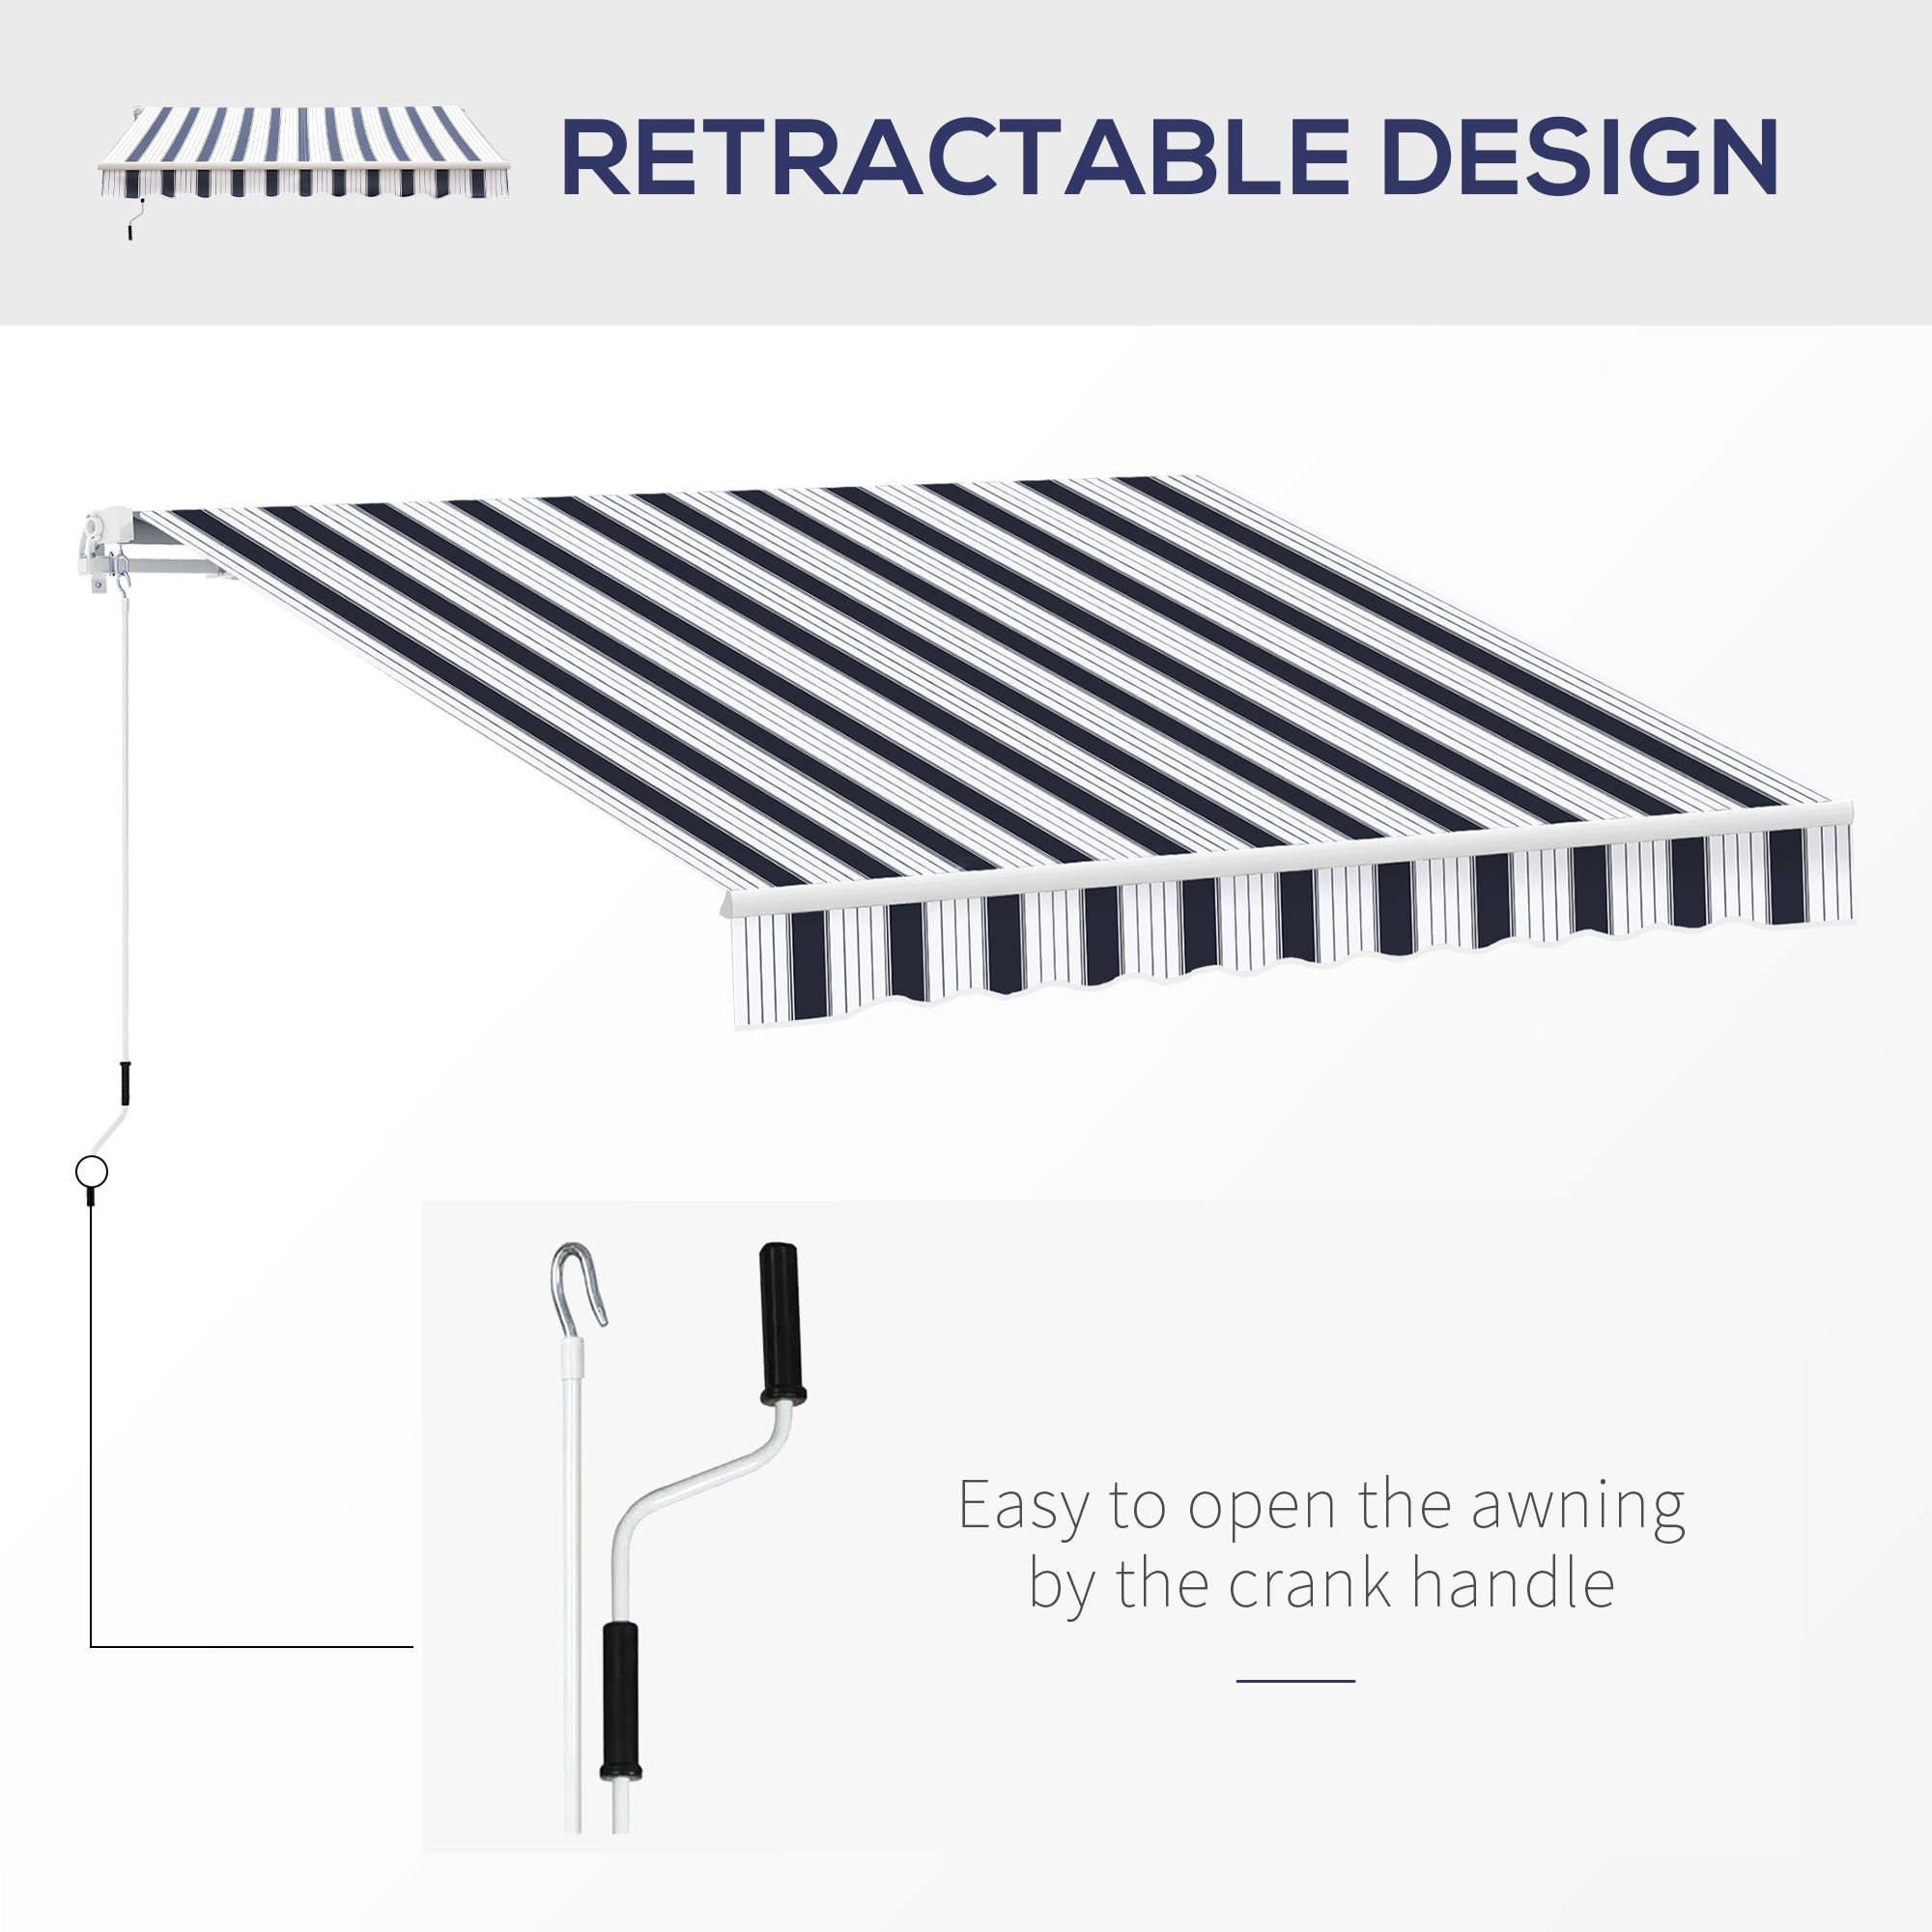 Outsunny 2.5m x 2m Garden Patio Manual Awning Canopy Sun Shade Shelter Retractable with Winding Handle Blue White - Inspirely